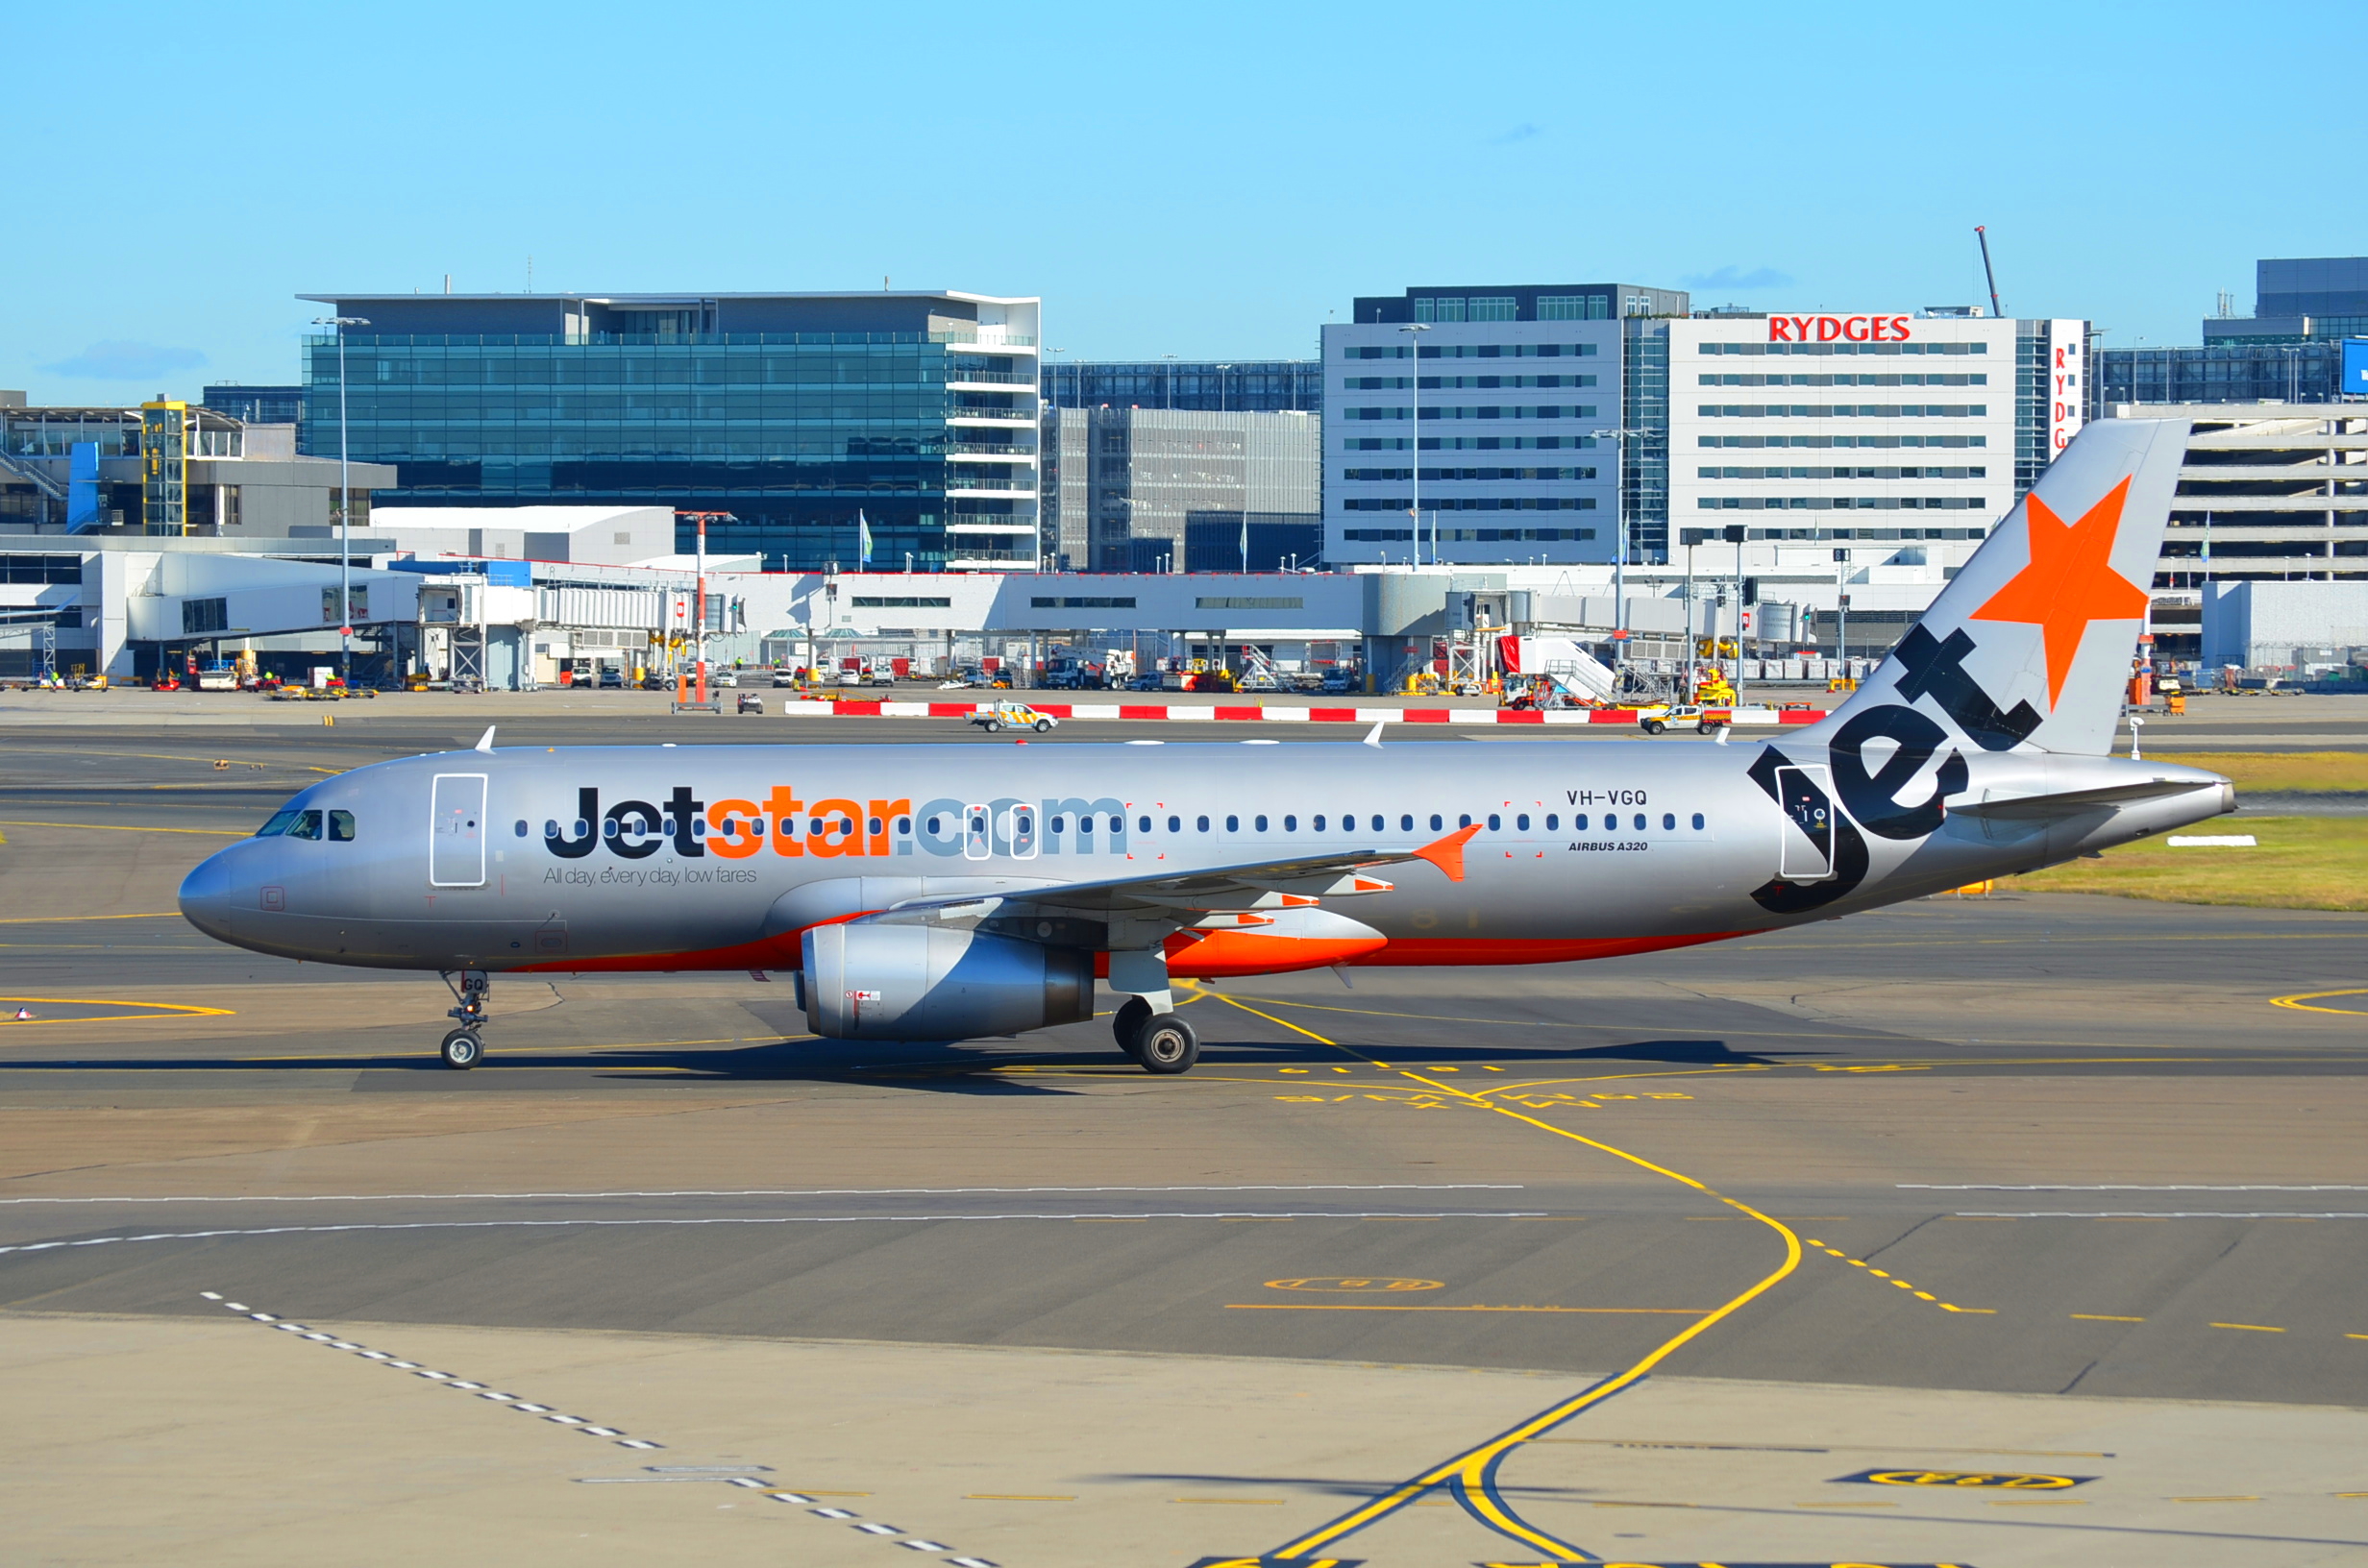 vehicles, airbus a320, airbus, aircraft, airplane, airport, jetstar, sydney